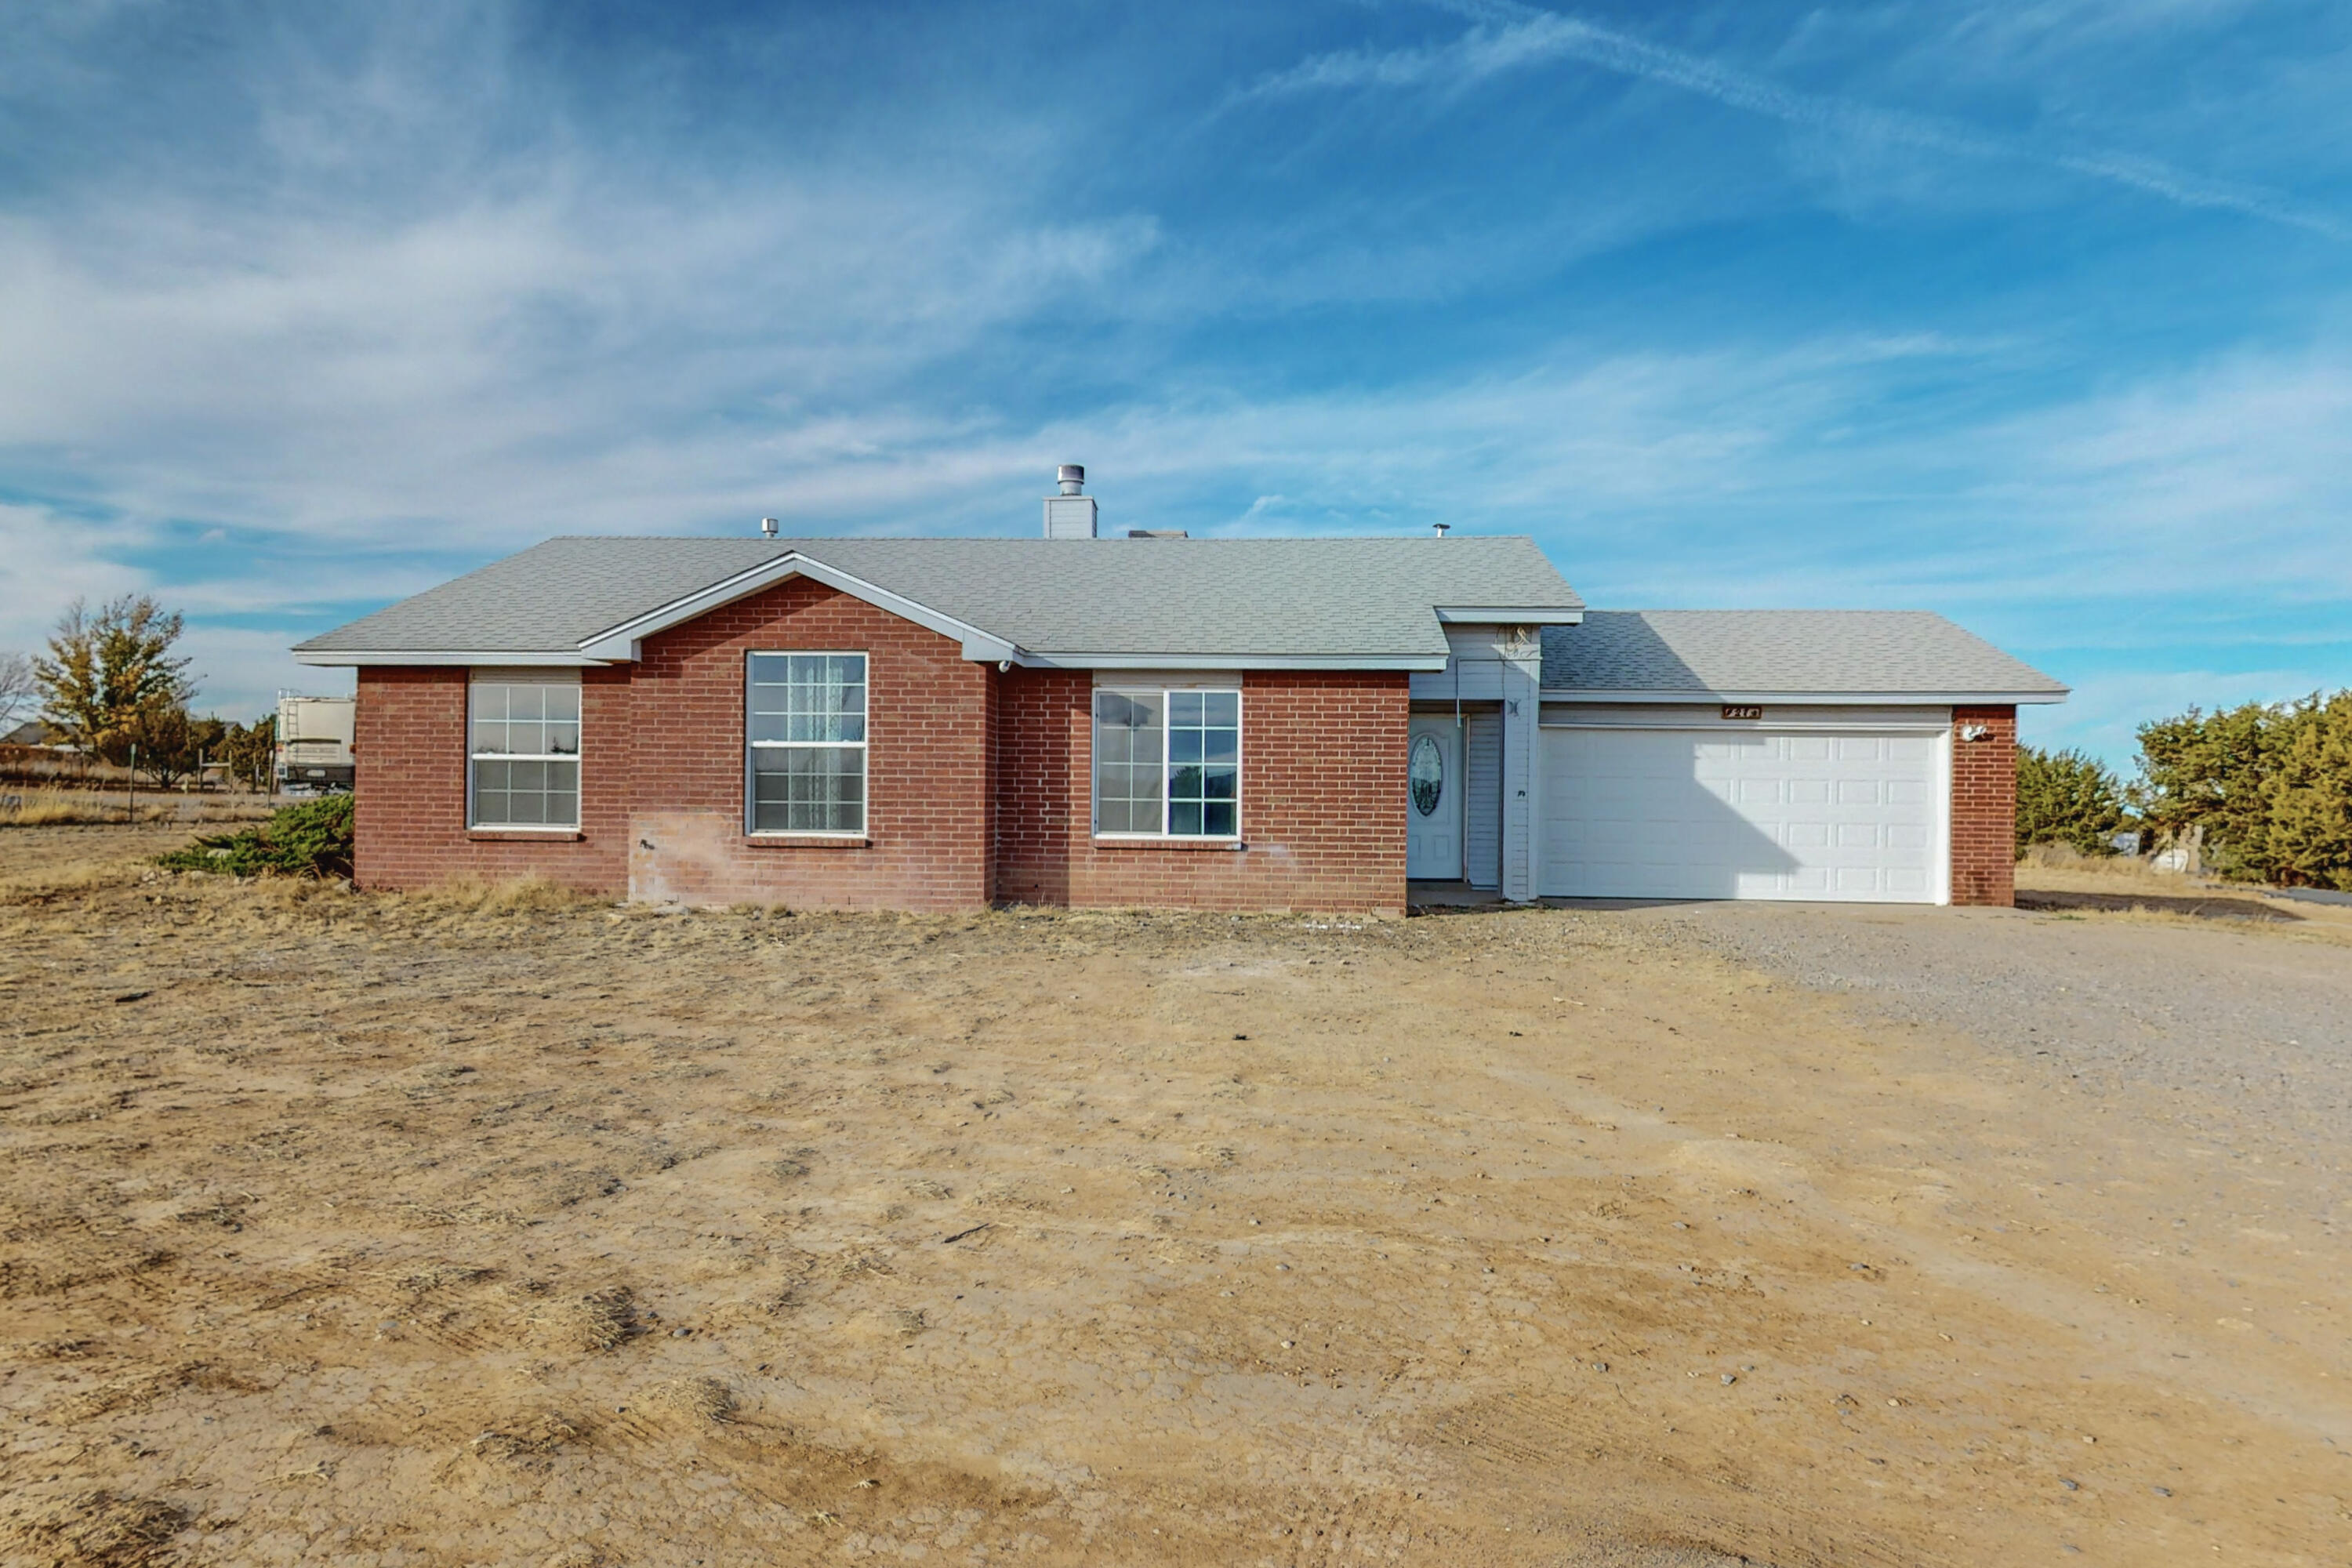 27 Mustang Road, Edgewood, New Mexico 87015, 3 Bedrooms Bedrooms, ,2 BathroomsBathrooms,Residential,For Sale,27 Mustang Road,1045095